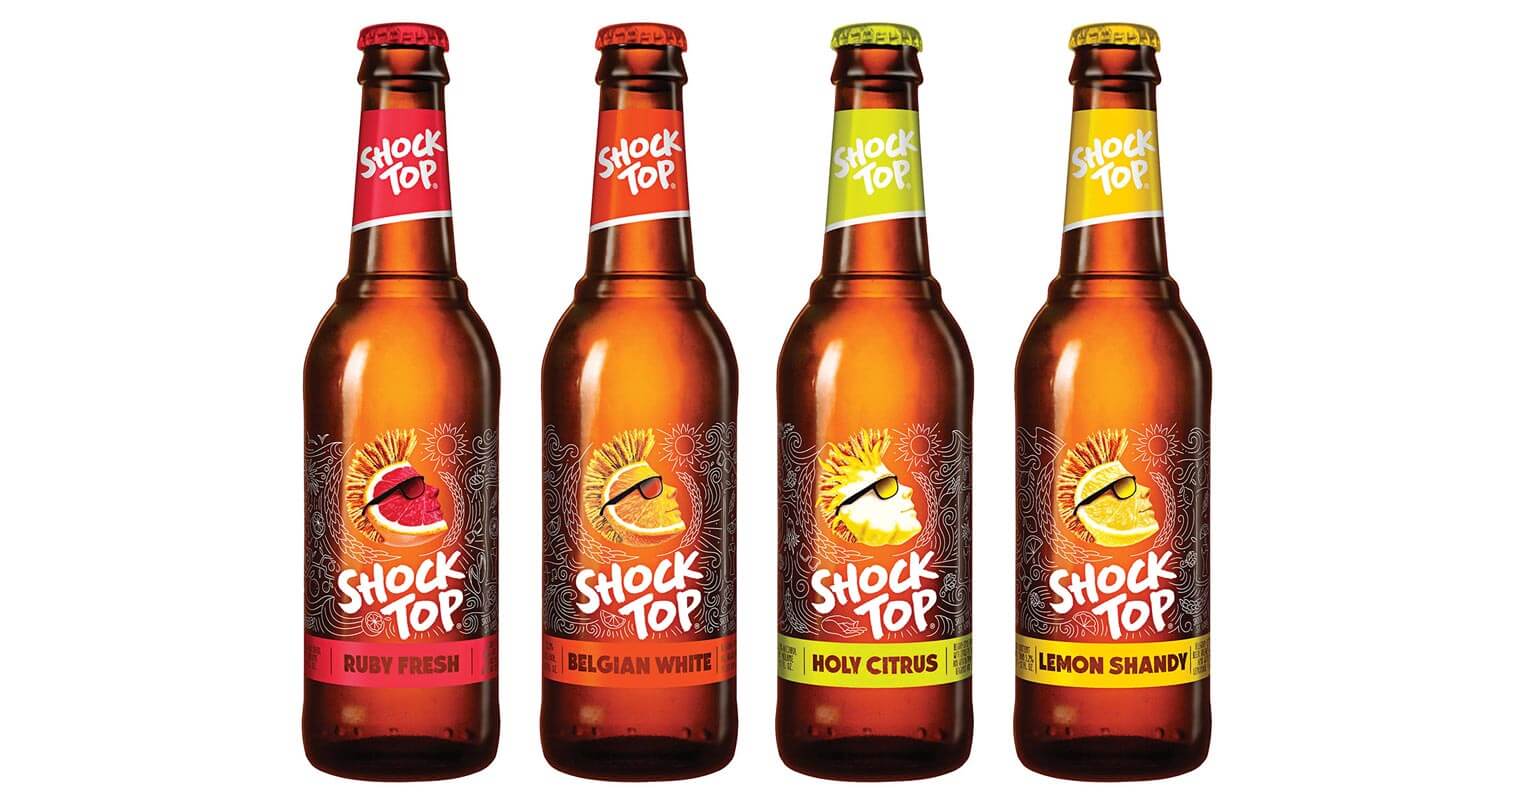 Shock Top Brews Up First Major Brand Refresh, featured image